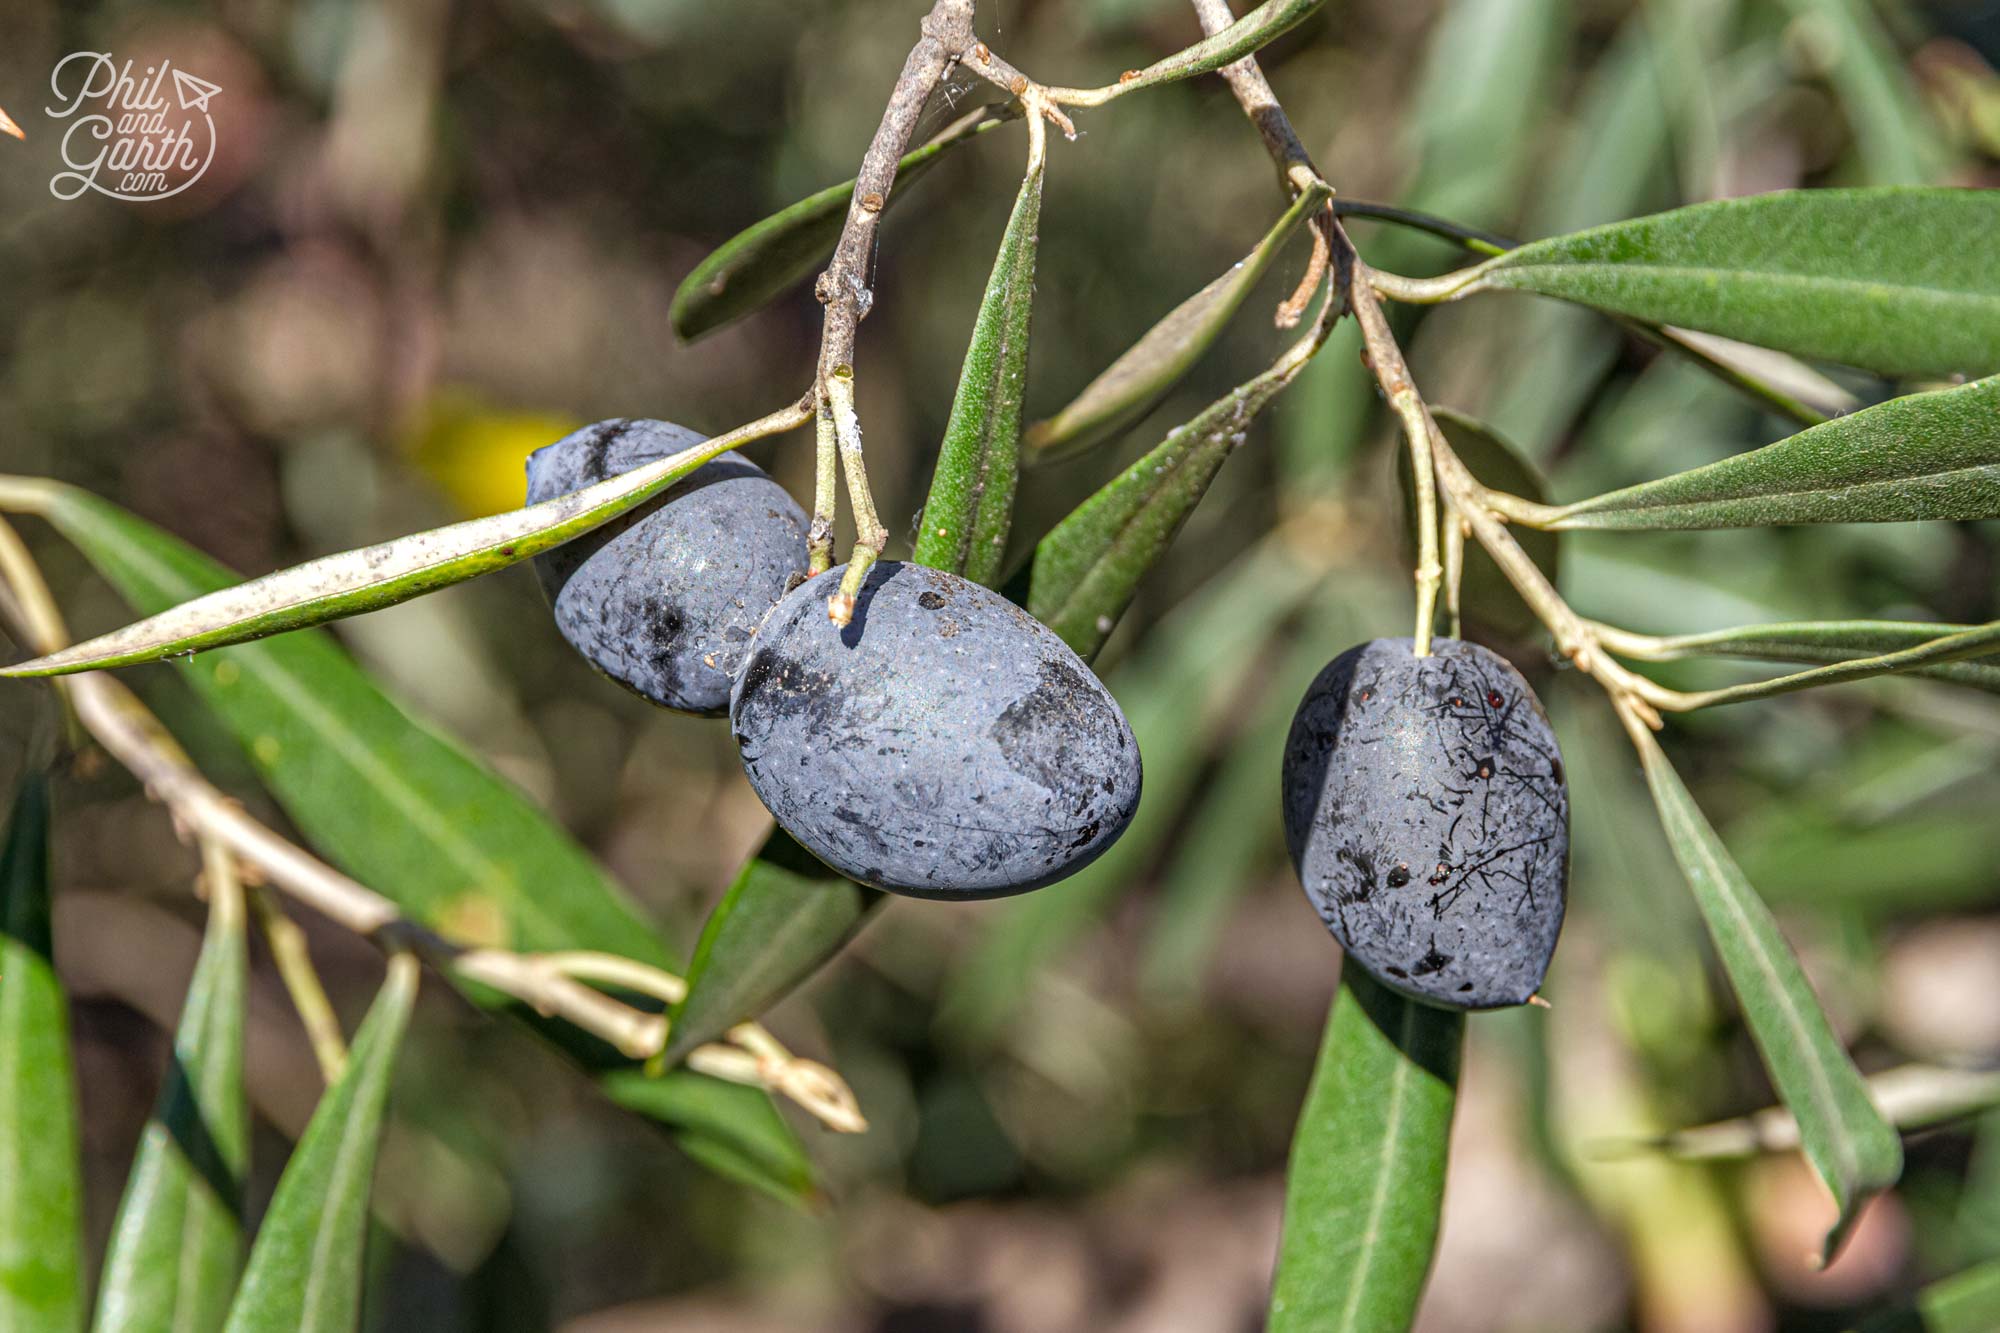 So many olives growing in the wild in this region